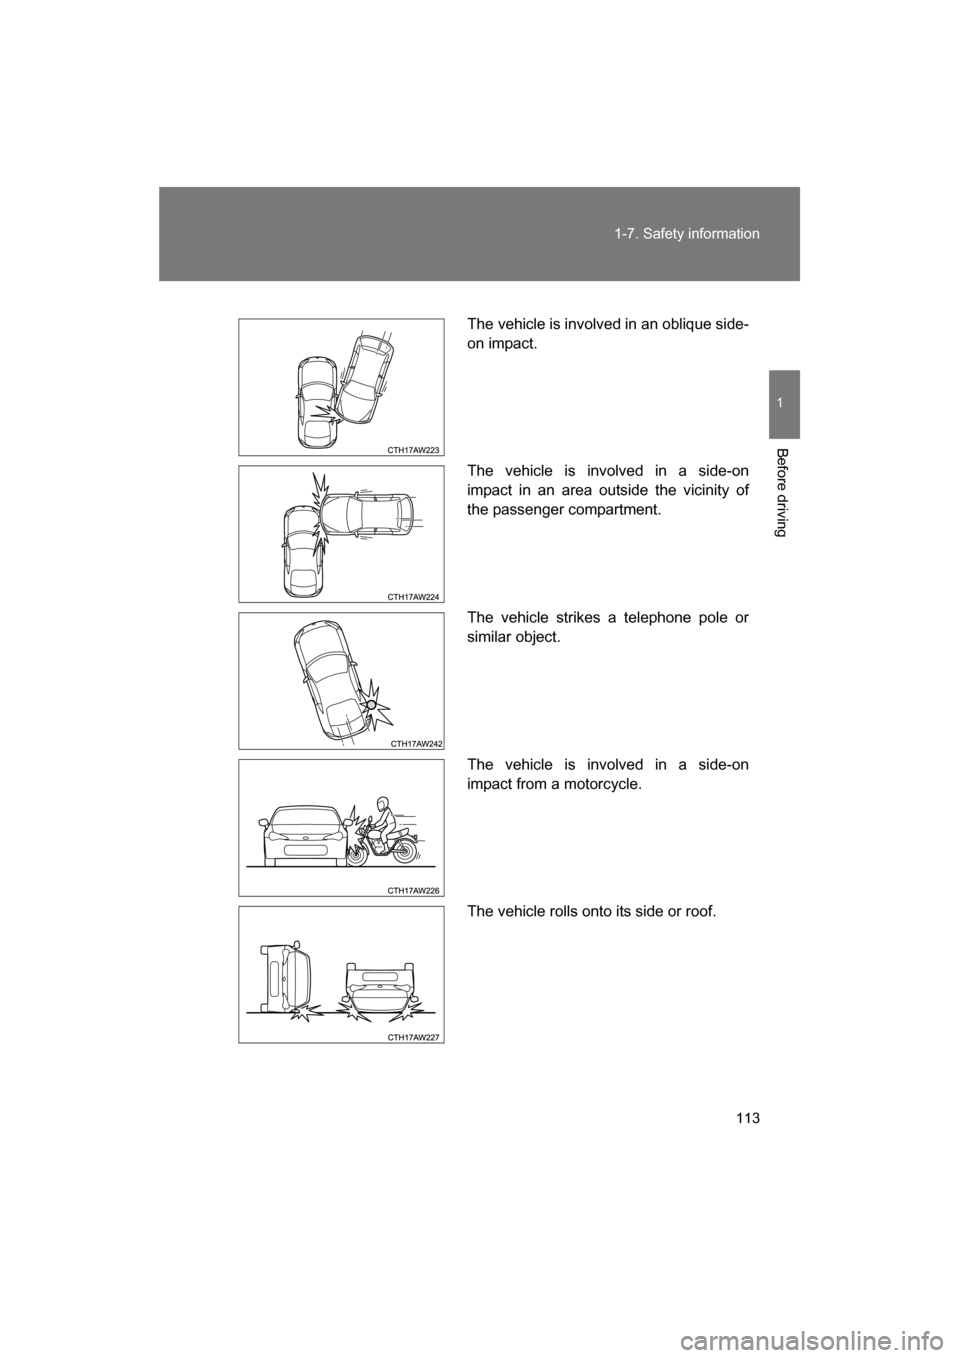 SUBARU BRZ 2014 1.G Owners Manual 113
1-7. Safety information
1
Before driving
The vehicle is involved in an oblique side- 
on impact. 
The vehicle is involved in a side-on 
impact in an area outside the vicinity of
the passenger comp